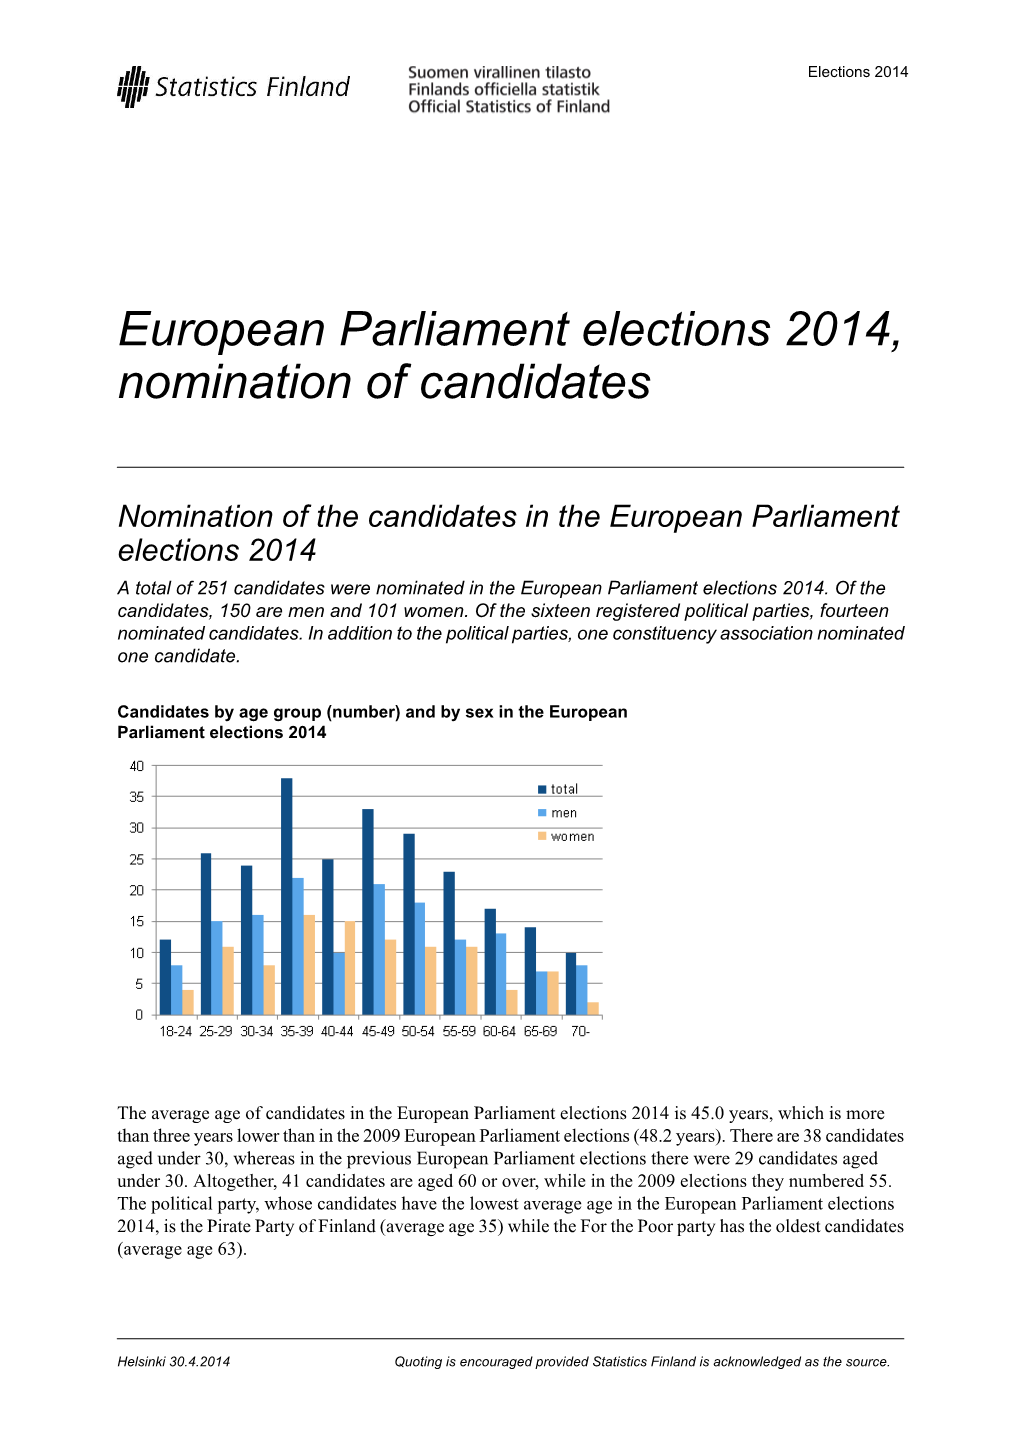 European Parliament Elections 2014, Nomination of Candidates